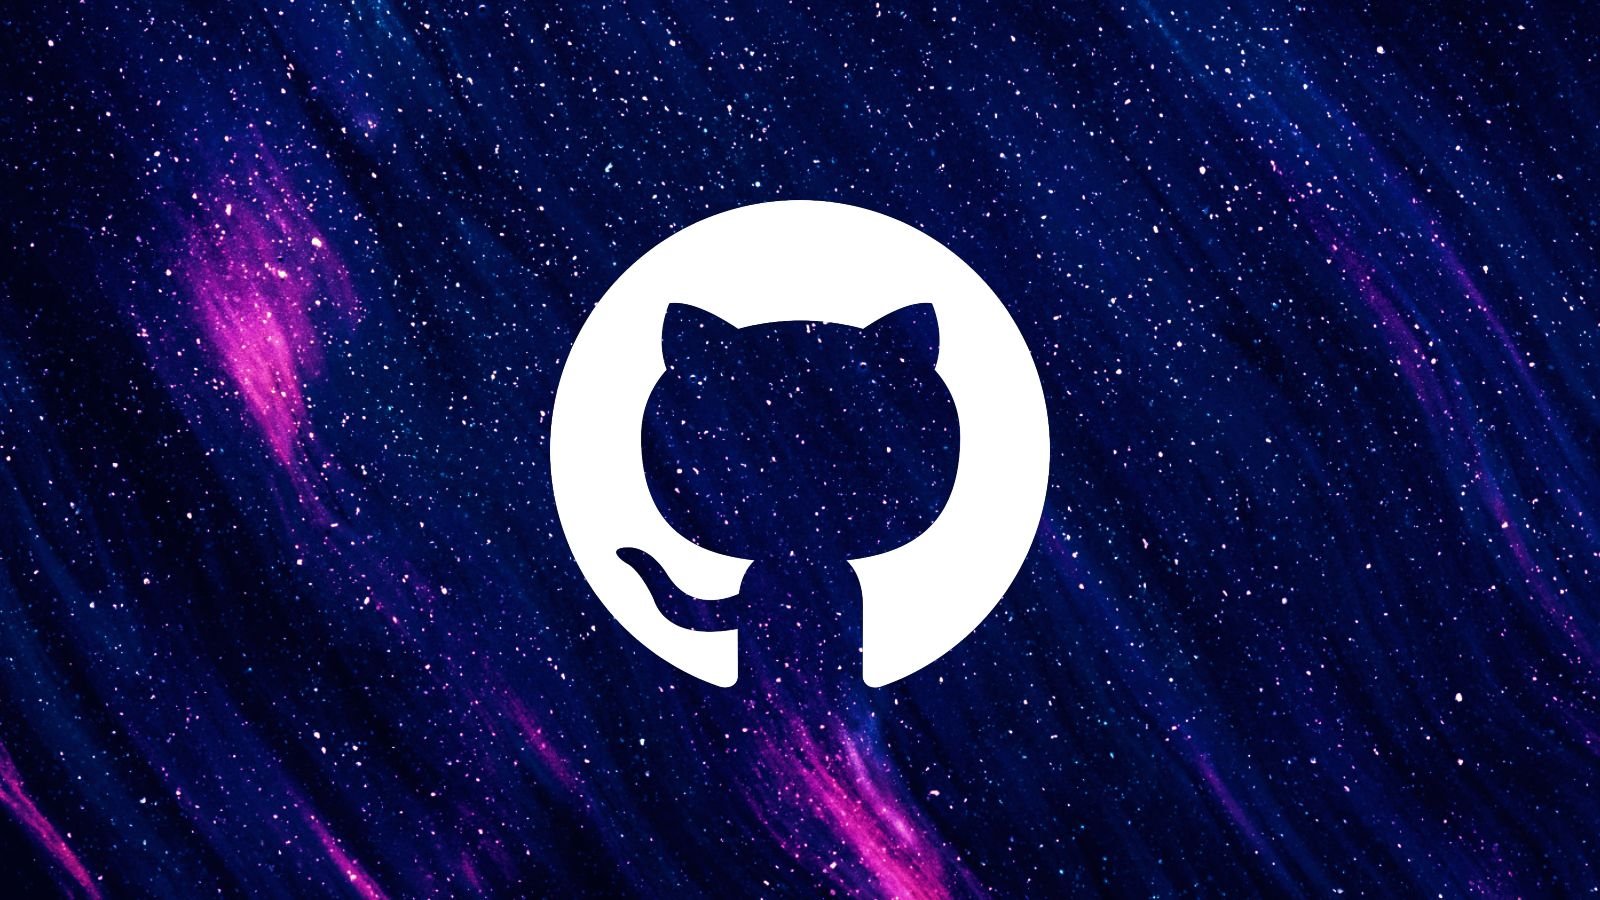 GitHub’s new privacy policy sparks backlash over tracking cookies